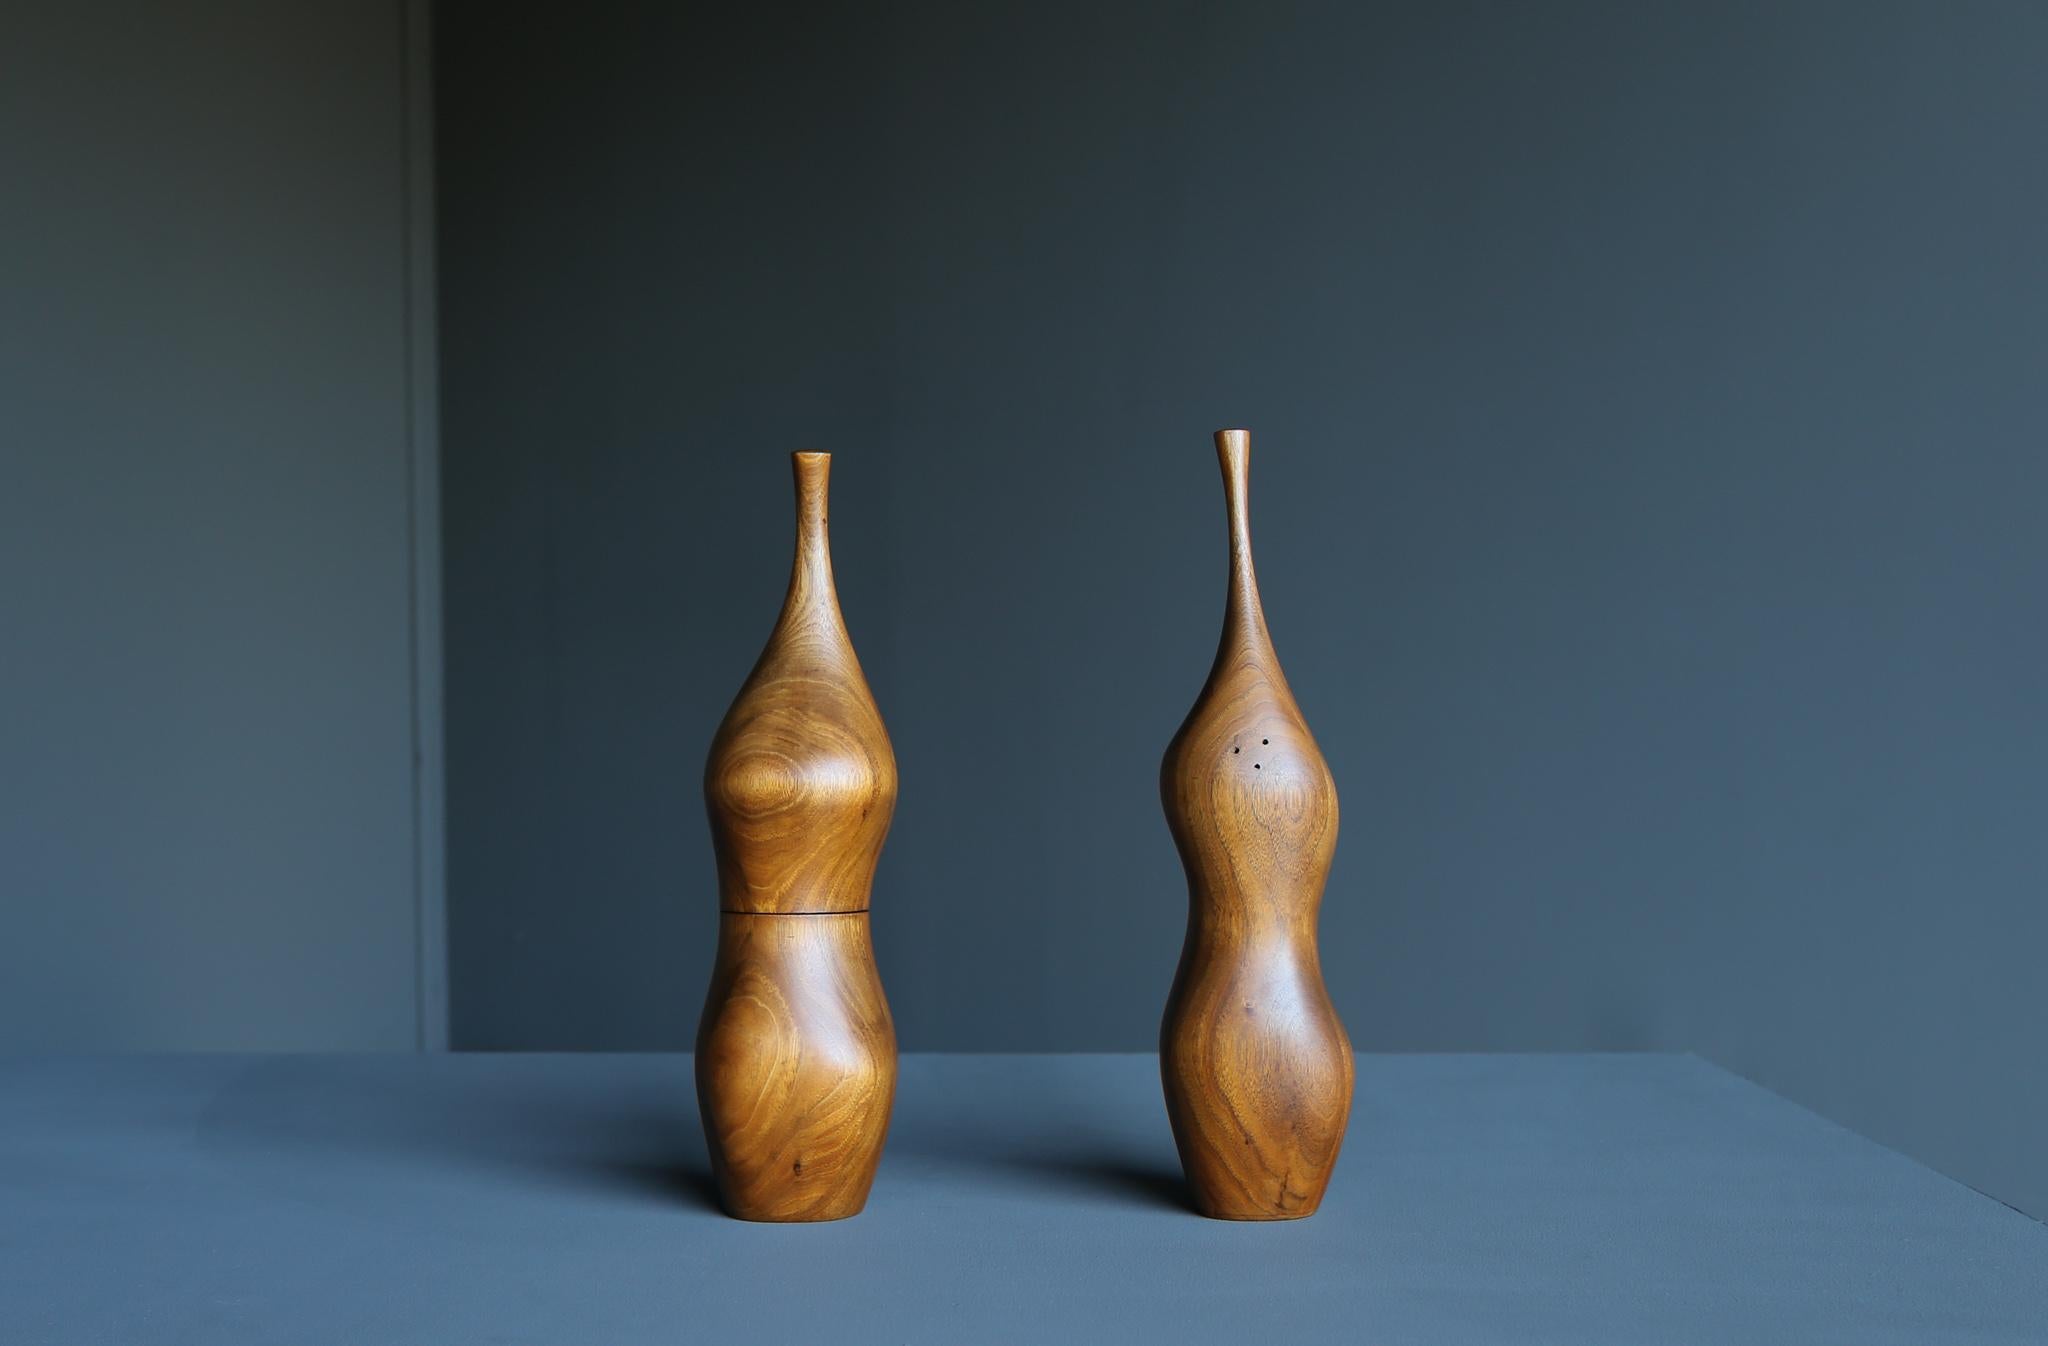 Daniel Loomis Valenza Handcrafted Sculptural Walnut Salt and Pepper Mill, 1970s

Daniel Loomis Valenza (b. 1934) is a New Hampshire craftsman and professor. He taught woodworking at the University of New Hampshire from 1959–1999. In addition to